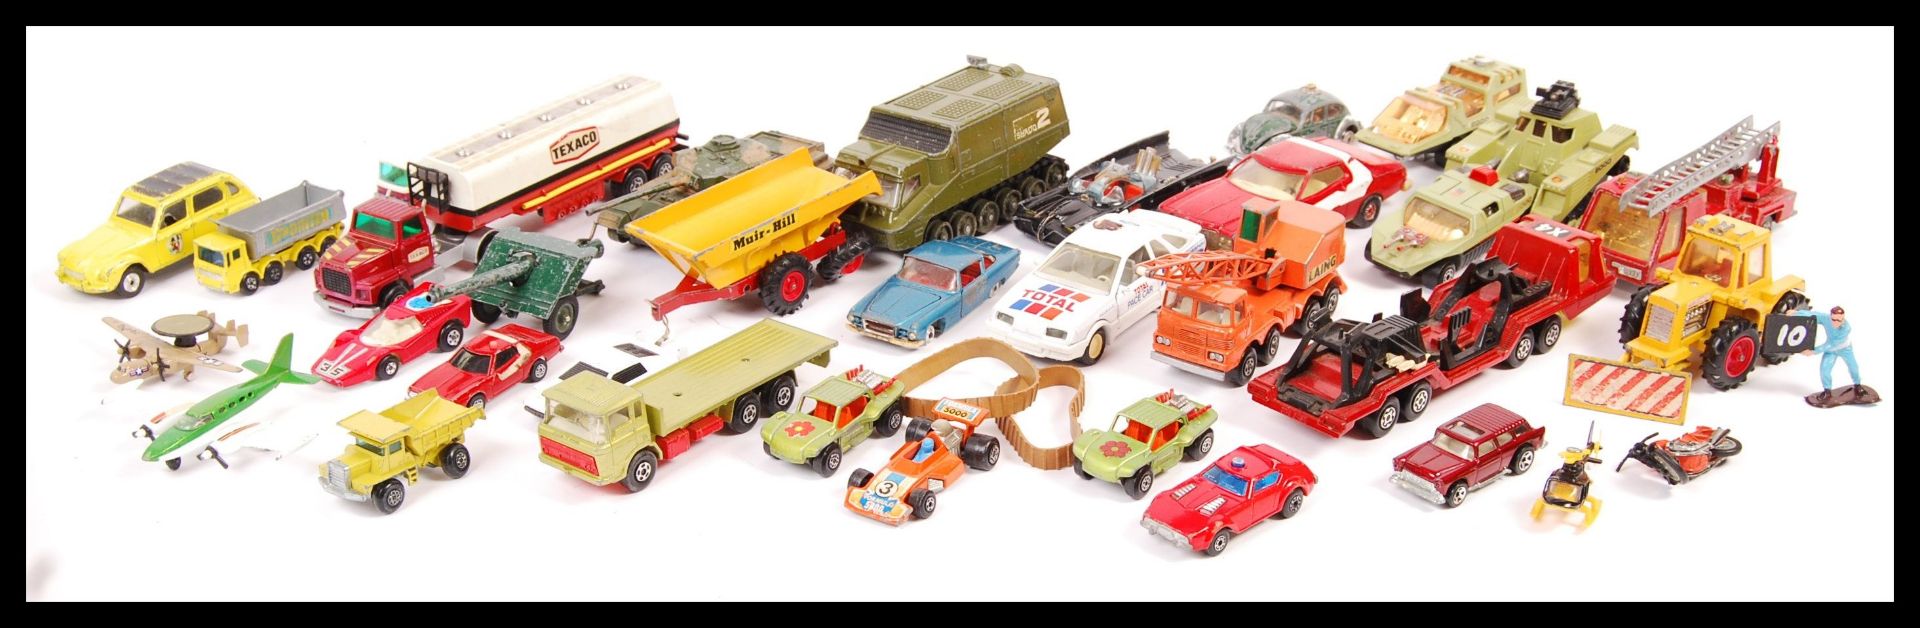 COLLECTION OF LOOSE VINTAGE DIECAST